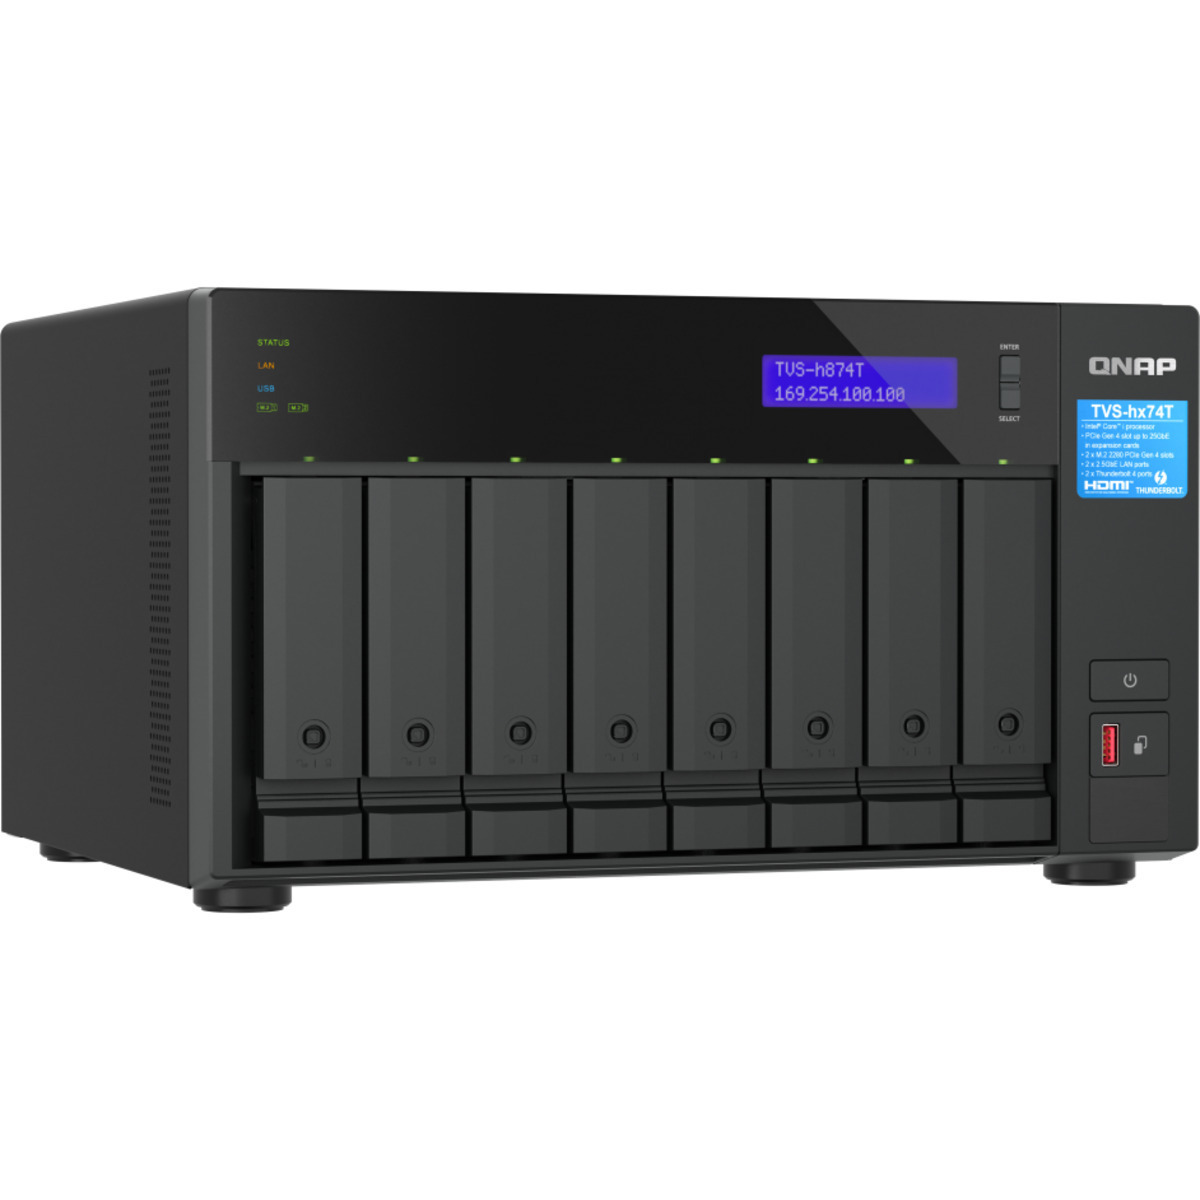 buy QNAP TVS-h874T Core i9 Thunderbolt 4 48tb Desktop DAS-NAS - Combo Direct + Network Storage Device 8x6000gb Western Digital Red WD60EFAX 3.5 5400rpm SATA 6Gb/s HDD NAS Class Drives Installed - Burn-In Tested - ON SALE - nas headquarters buy network attached storage server device das new raid-5 free shipping usa spring sale TVS-h874T Core i9 Thunderbolt 4